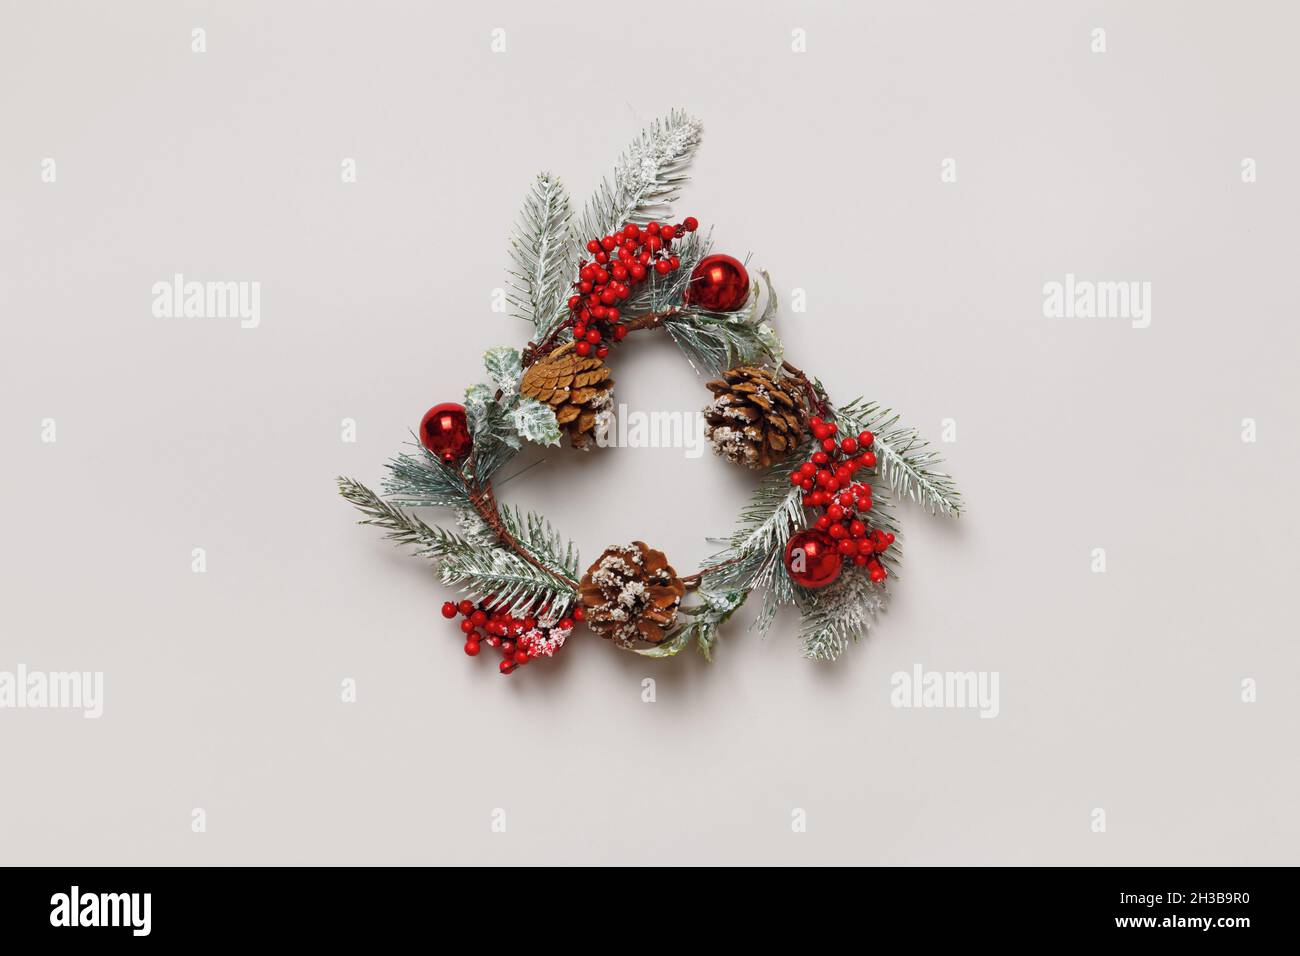 Christmas artificial wreath from branches of evergreen trees with cones and berries on an isolated light gray background. Stock Photo